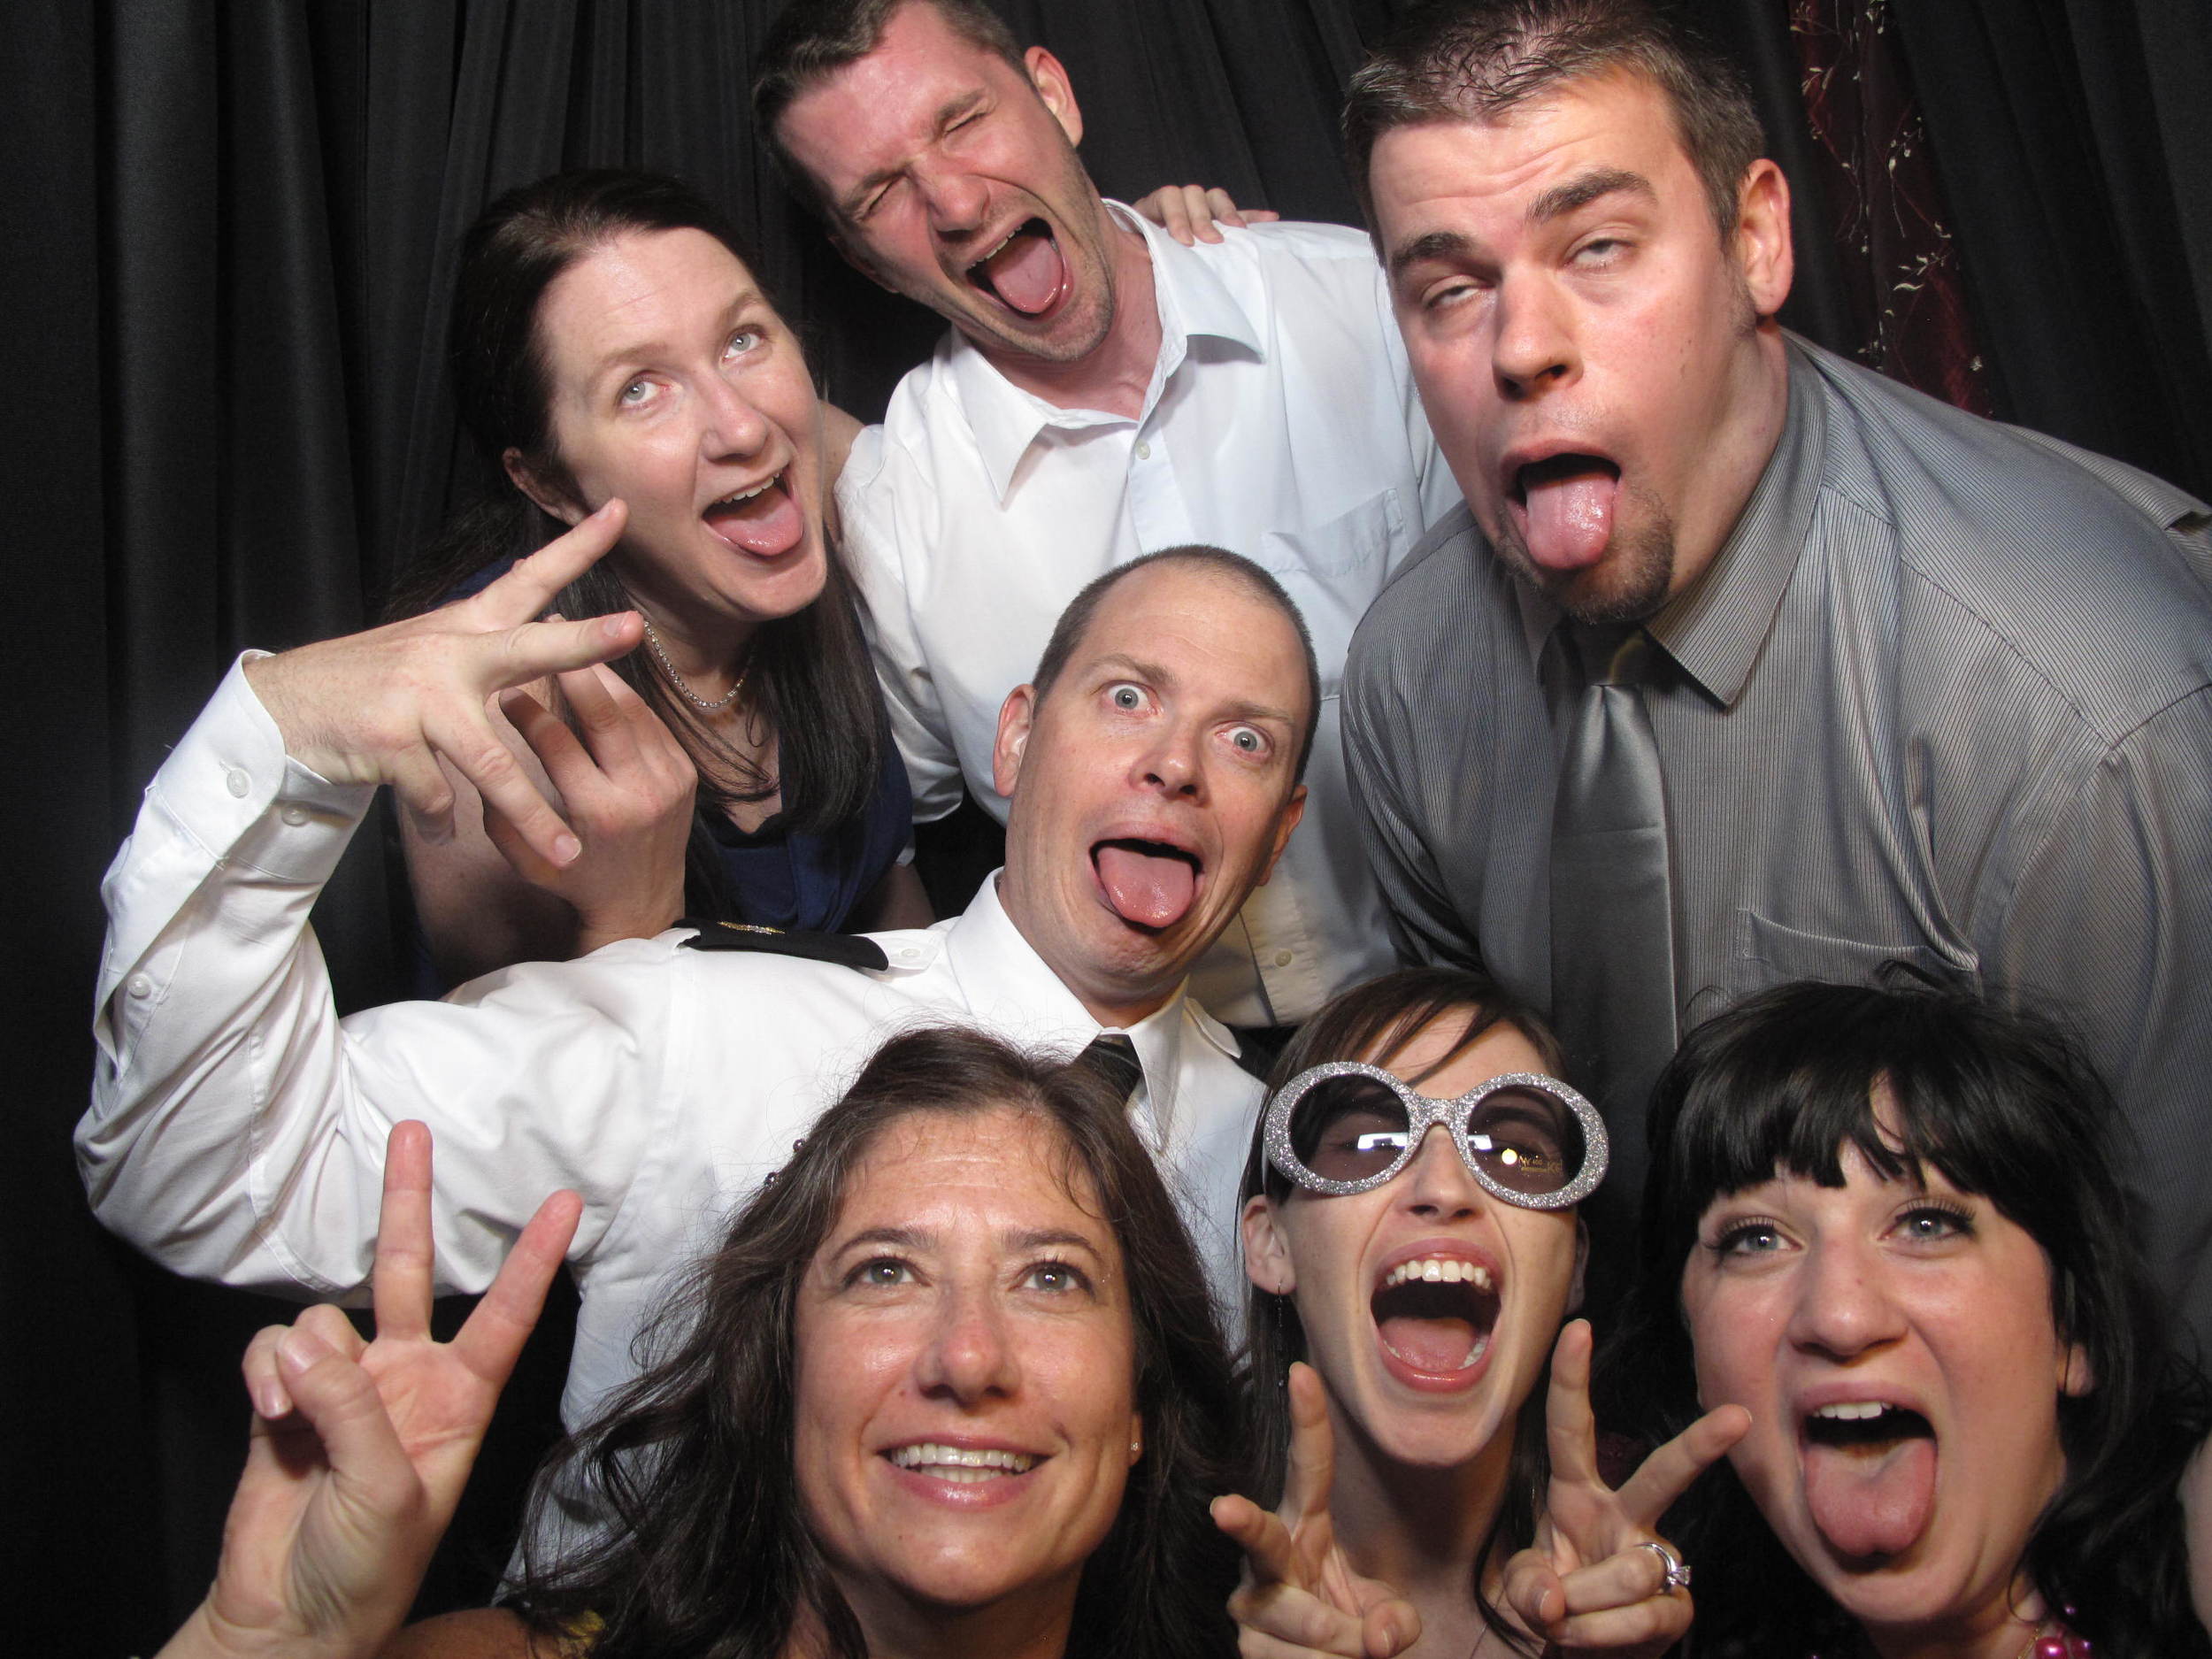 Snapshot Photobooths at Southgate Manor in Freehold, New Jersey